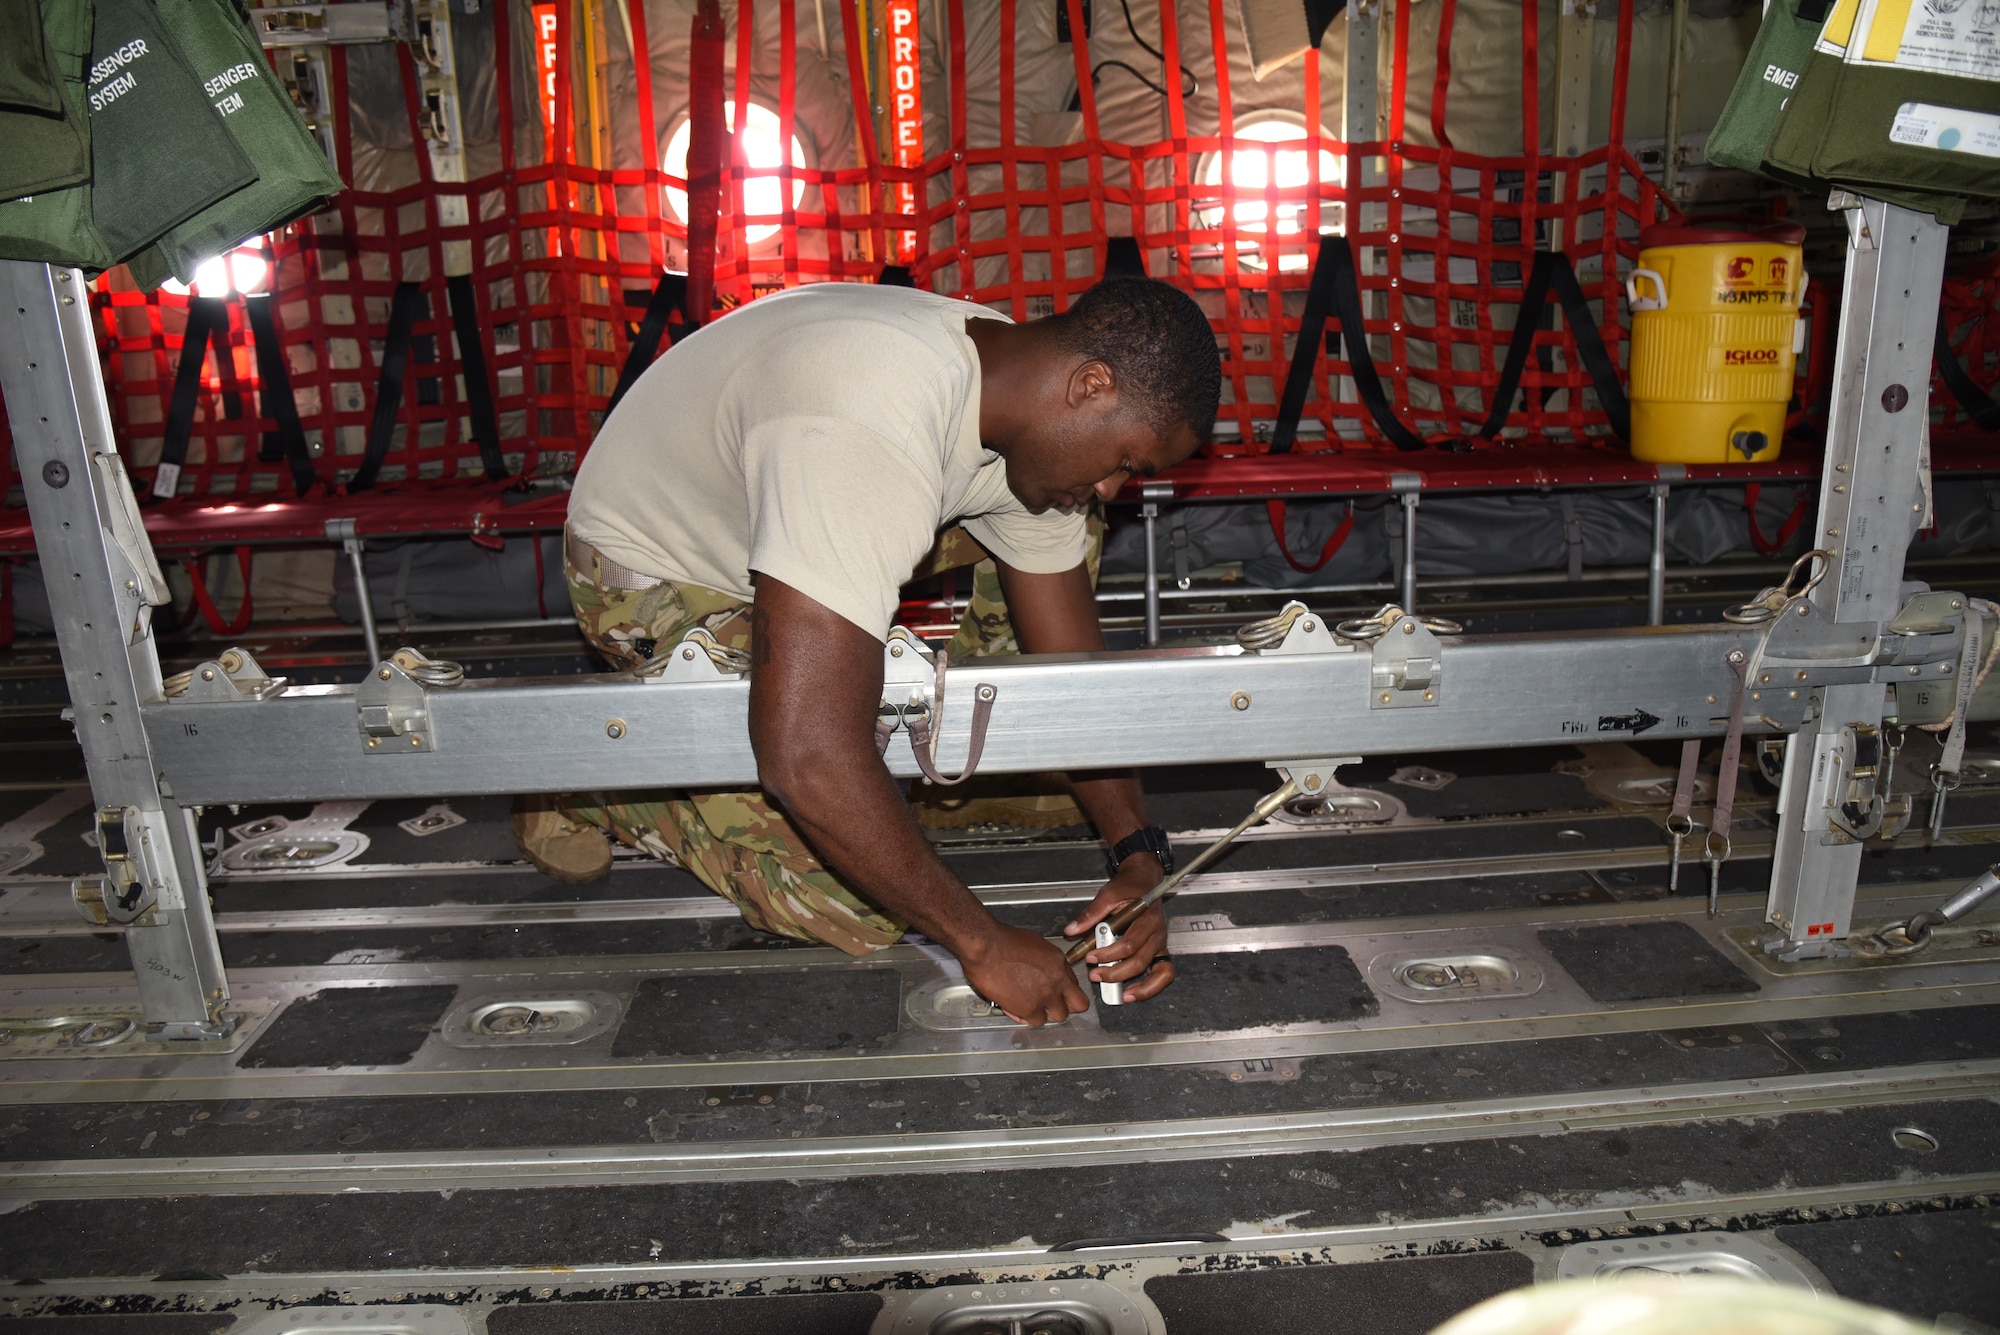 Tech. Sgt. Gary Bryant, a loadmaster with the 815th Airlift Squadron, 403rd Wing, installs the seating on the C-130J in preparation for paratroopers to use for exercise Swift Response 19, June 12, 2019. The exercise is one of the premier military crisis response training events featuring high readiness airborne forces from eight NATO nations. Activities include intermediate staging base operations, multiple airborne operations, and several air assault operations. The Swift Response exercises have had great success in creating a foundation for the strong relationships we share with several European allies and partners today. (U.S. Air Force photo by Master Sgt. Jessica Kendziorek)